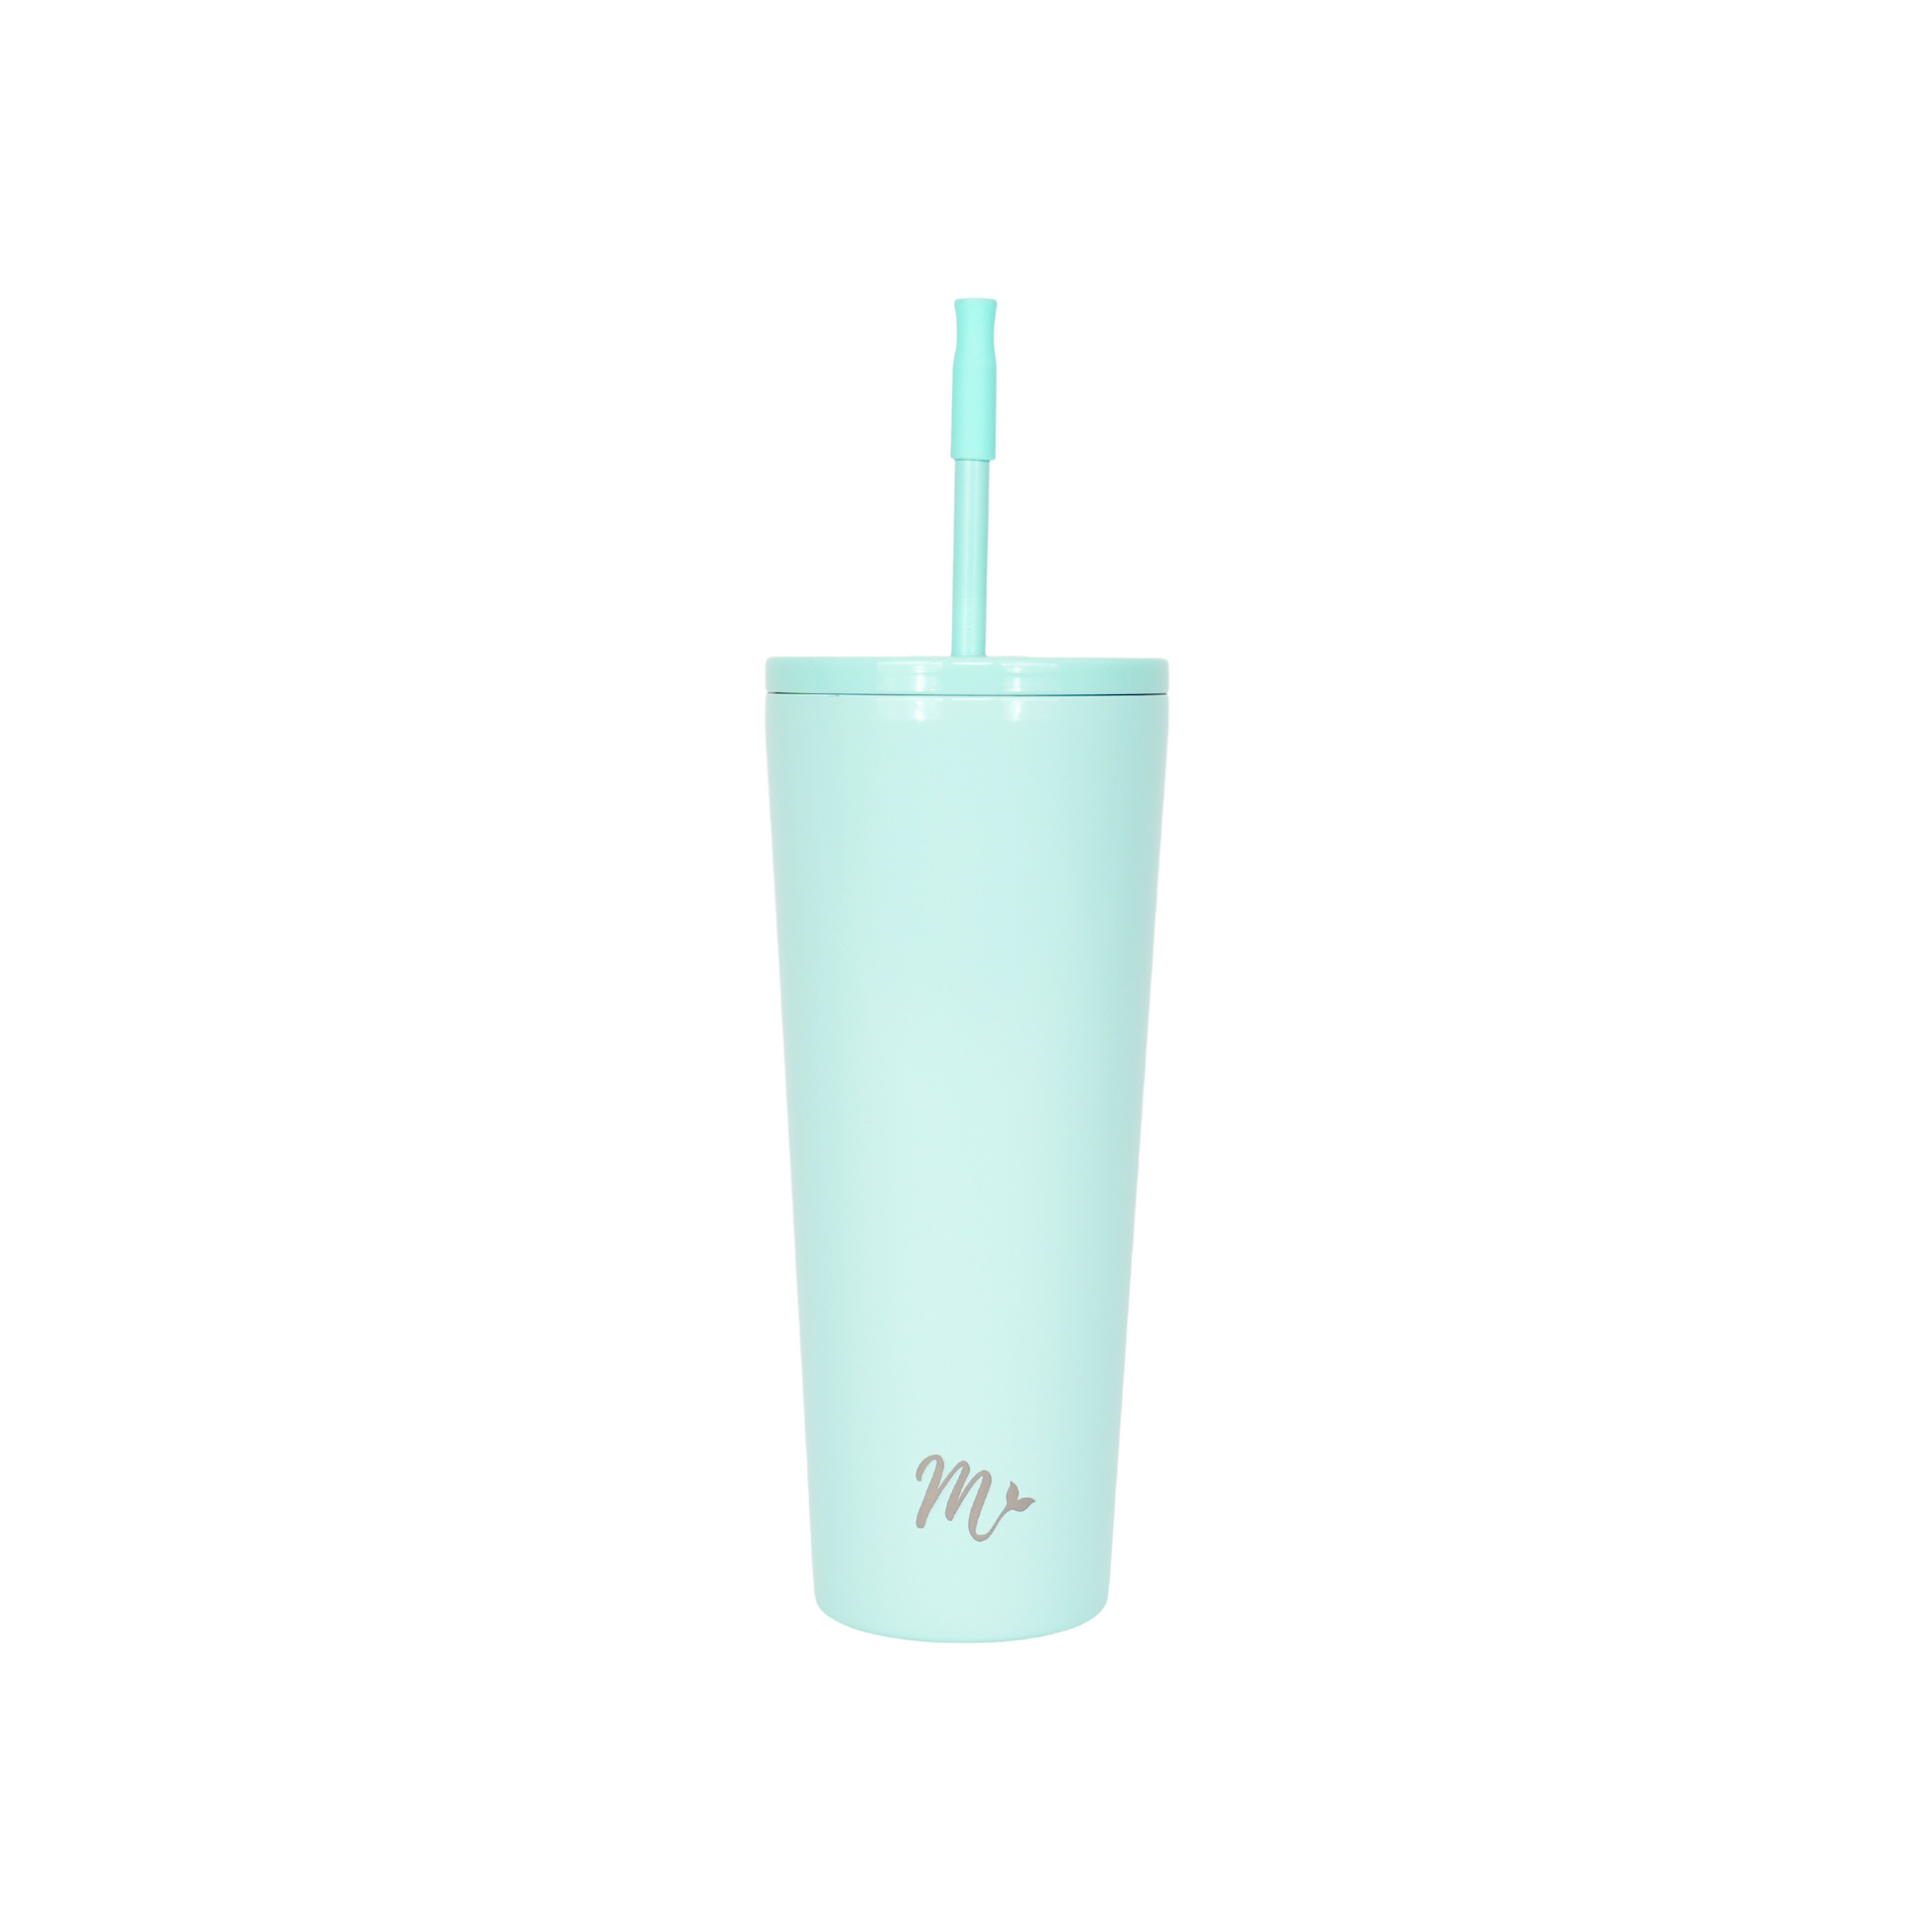 Get Starbucks Mint Green Glass Cup Delivered